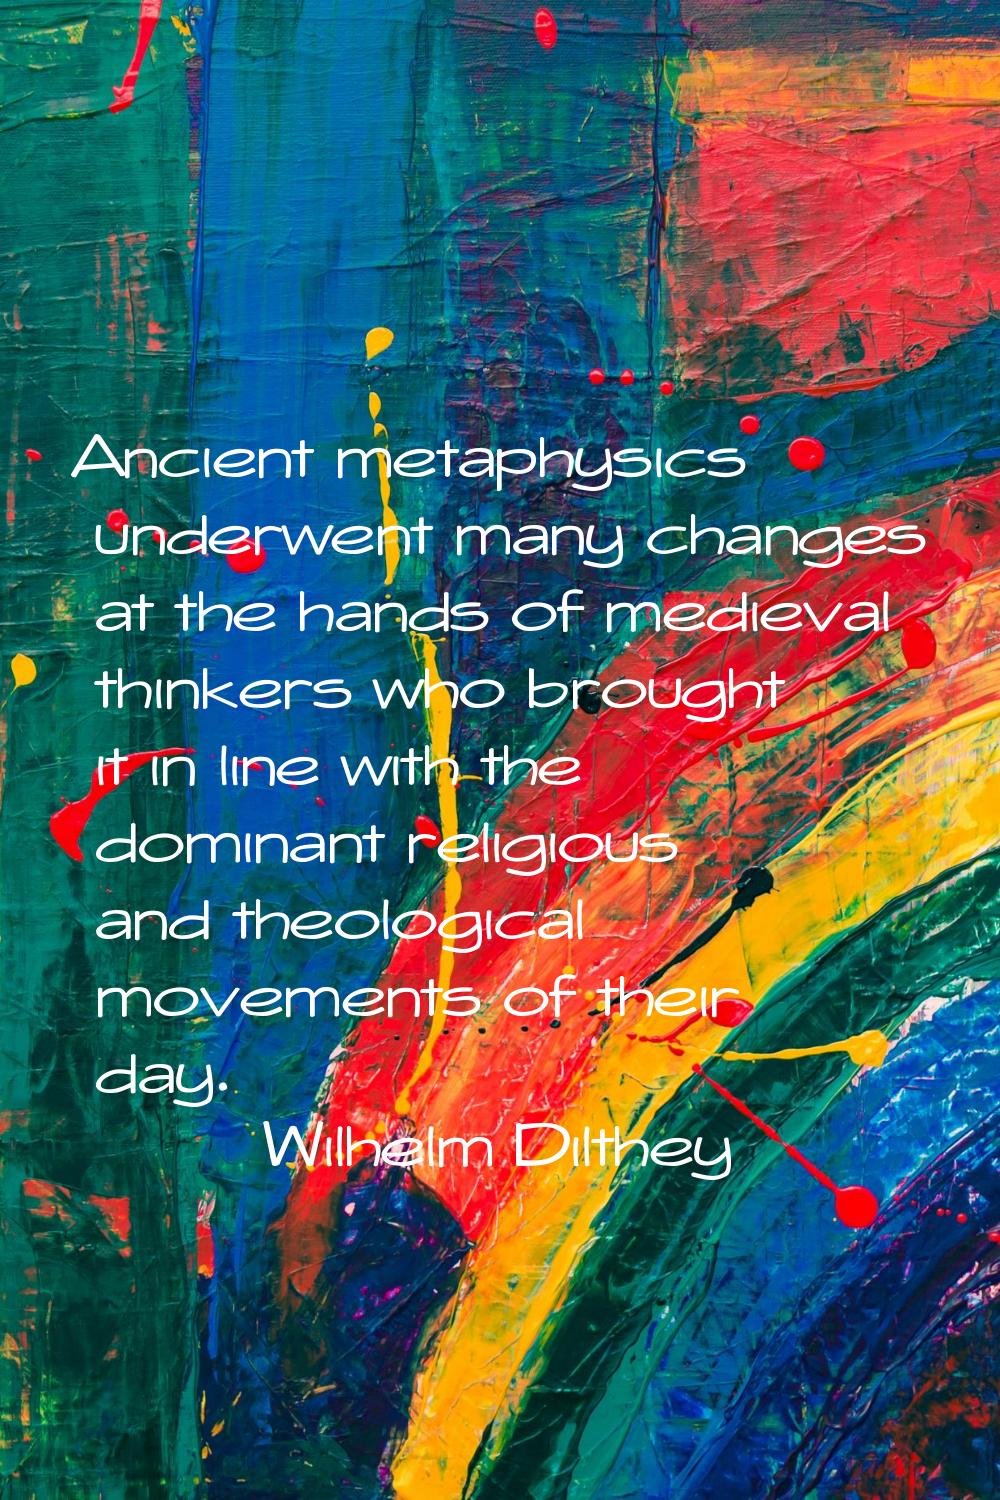 Ancient metaphysics underwent many changes at the hands of medieval thinkers who brought it in line